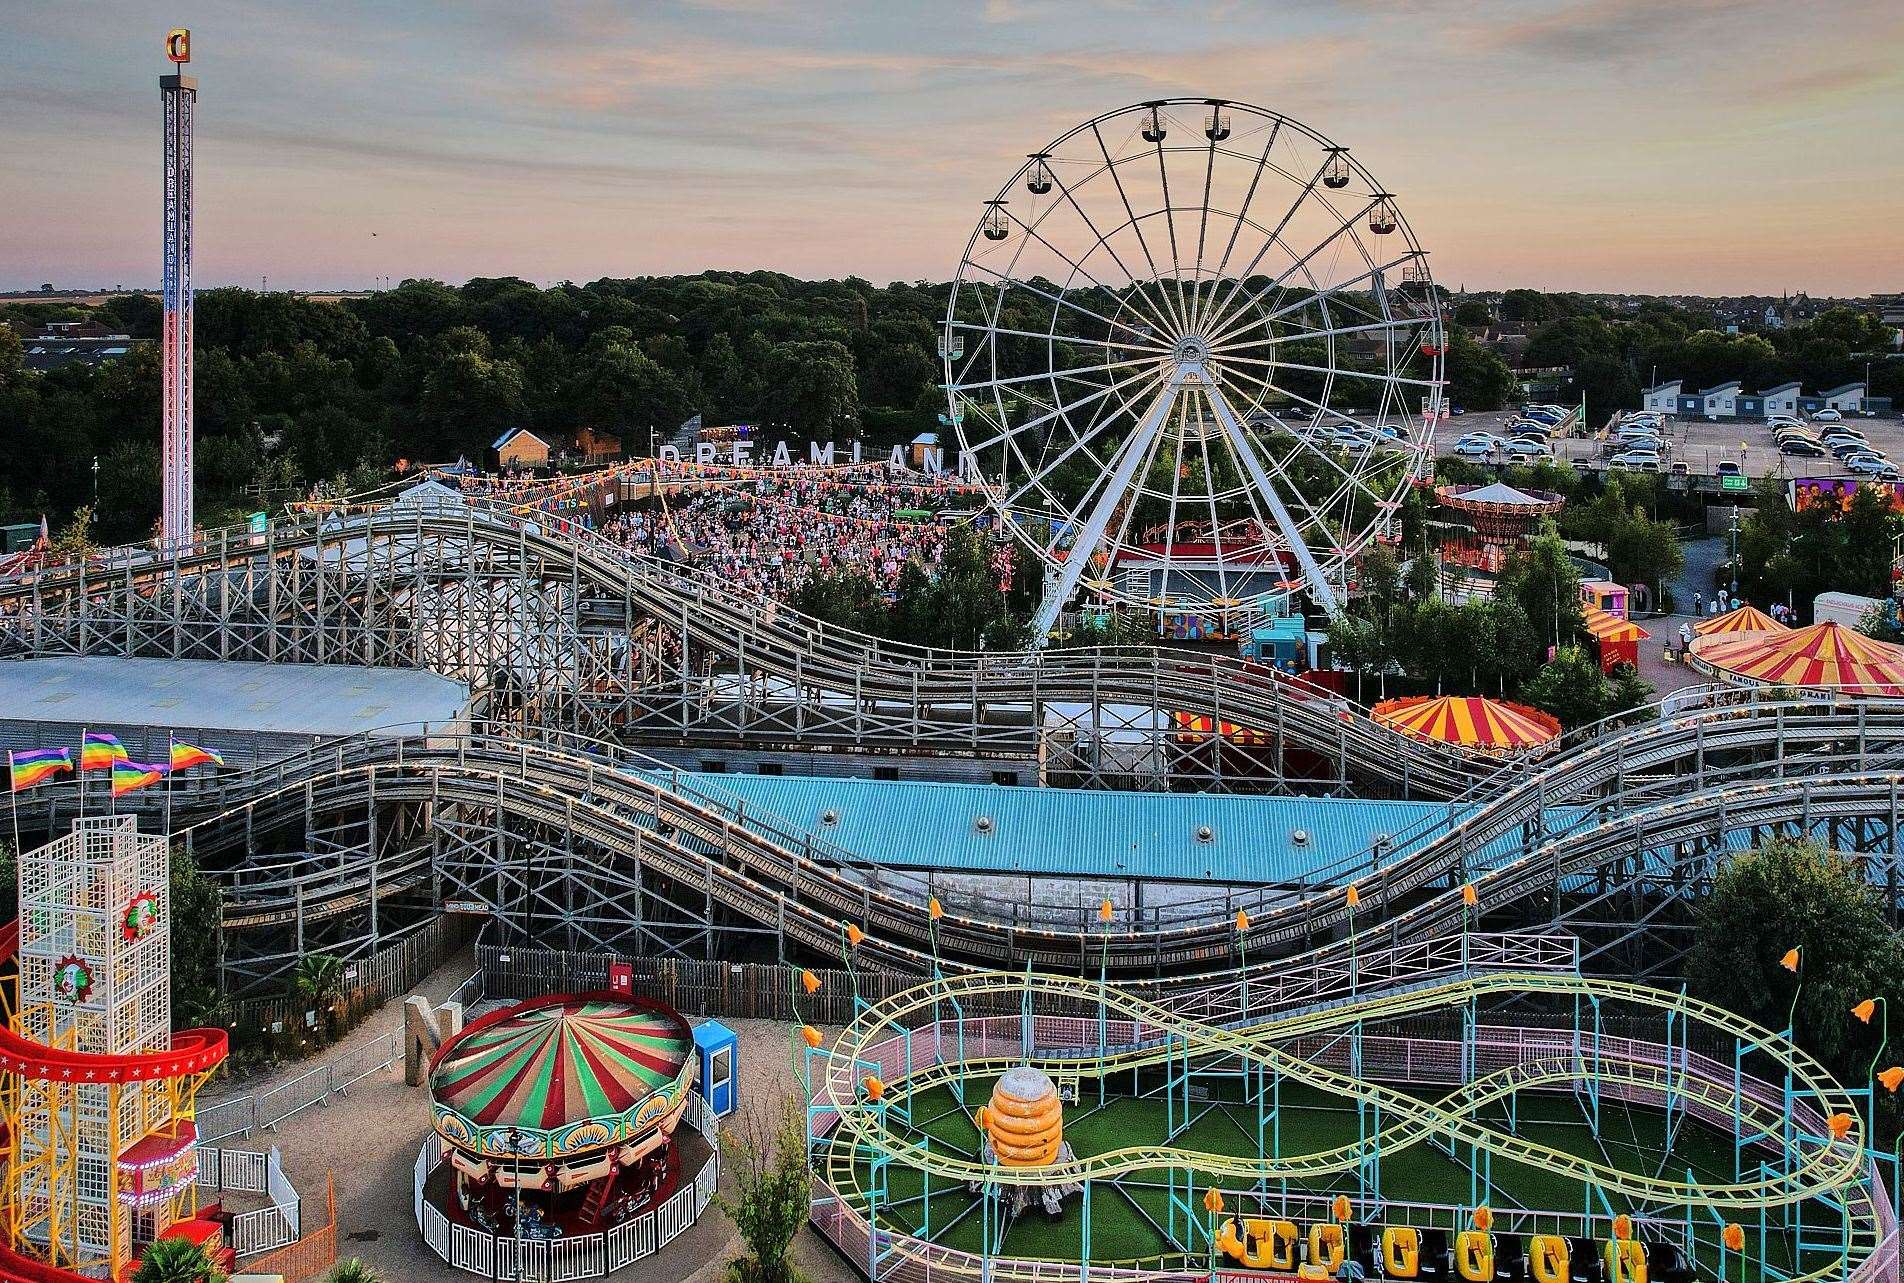 Dreamland has been given a dramatic overhaul since it reopened to the public in 2015